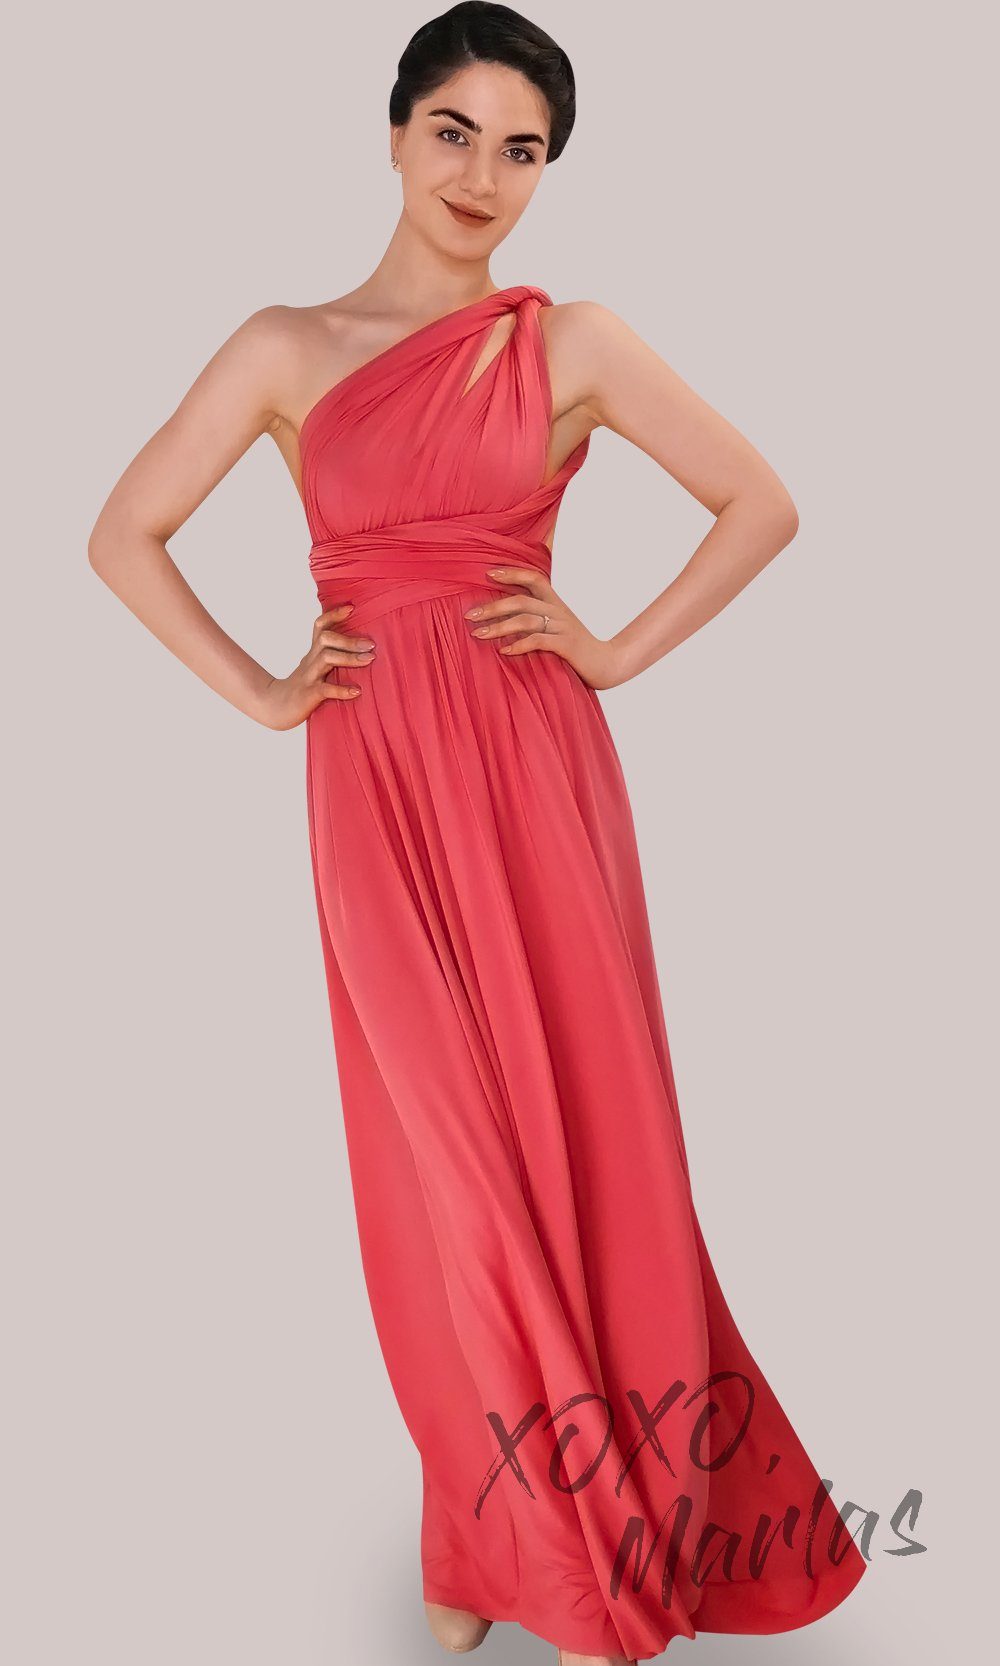 Long coral infinity bridesmaid dress or multiway dress or convertible dress.One dress worn in multiple ways.This orange peach one size dress is great for bridesmaid, prom, destination wedding, gala, cheap western party dress, semi formal, cocktail